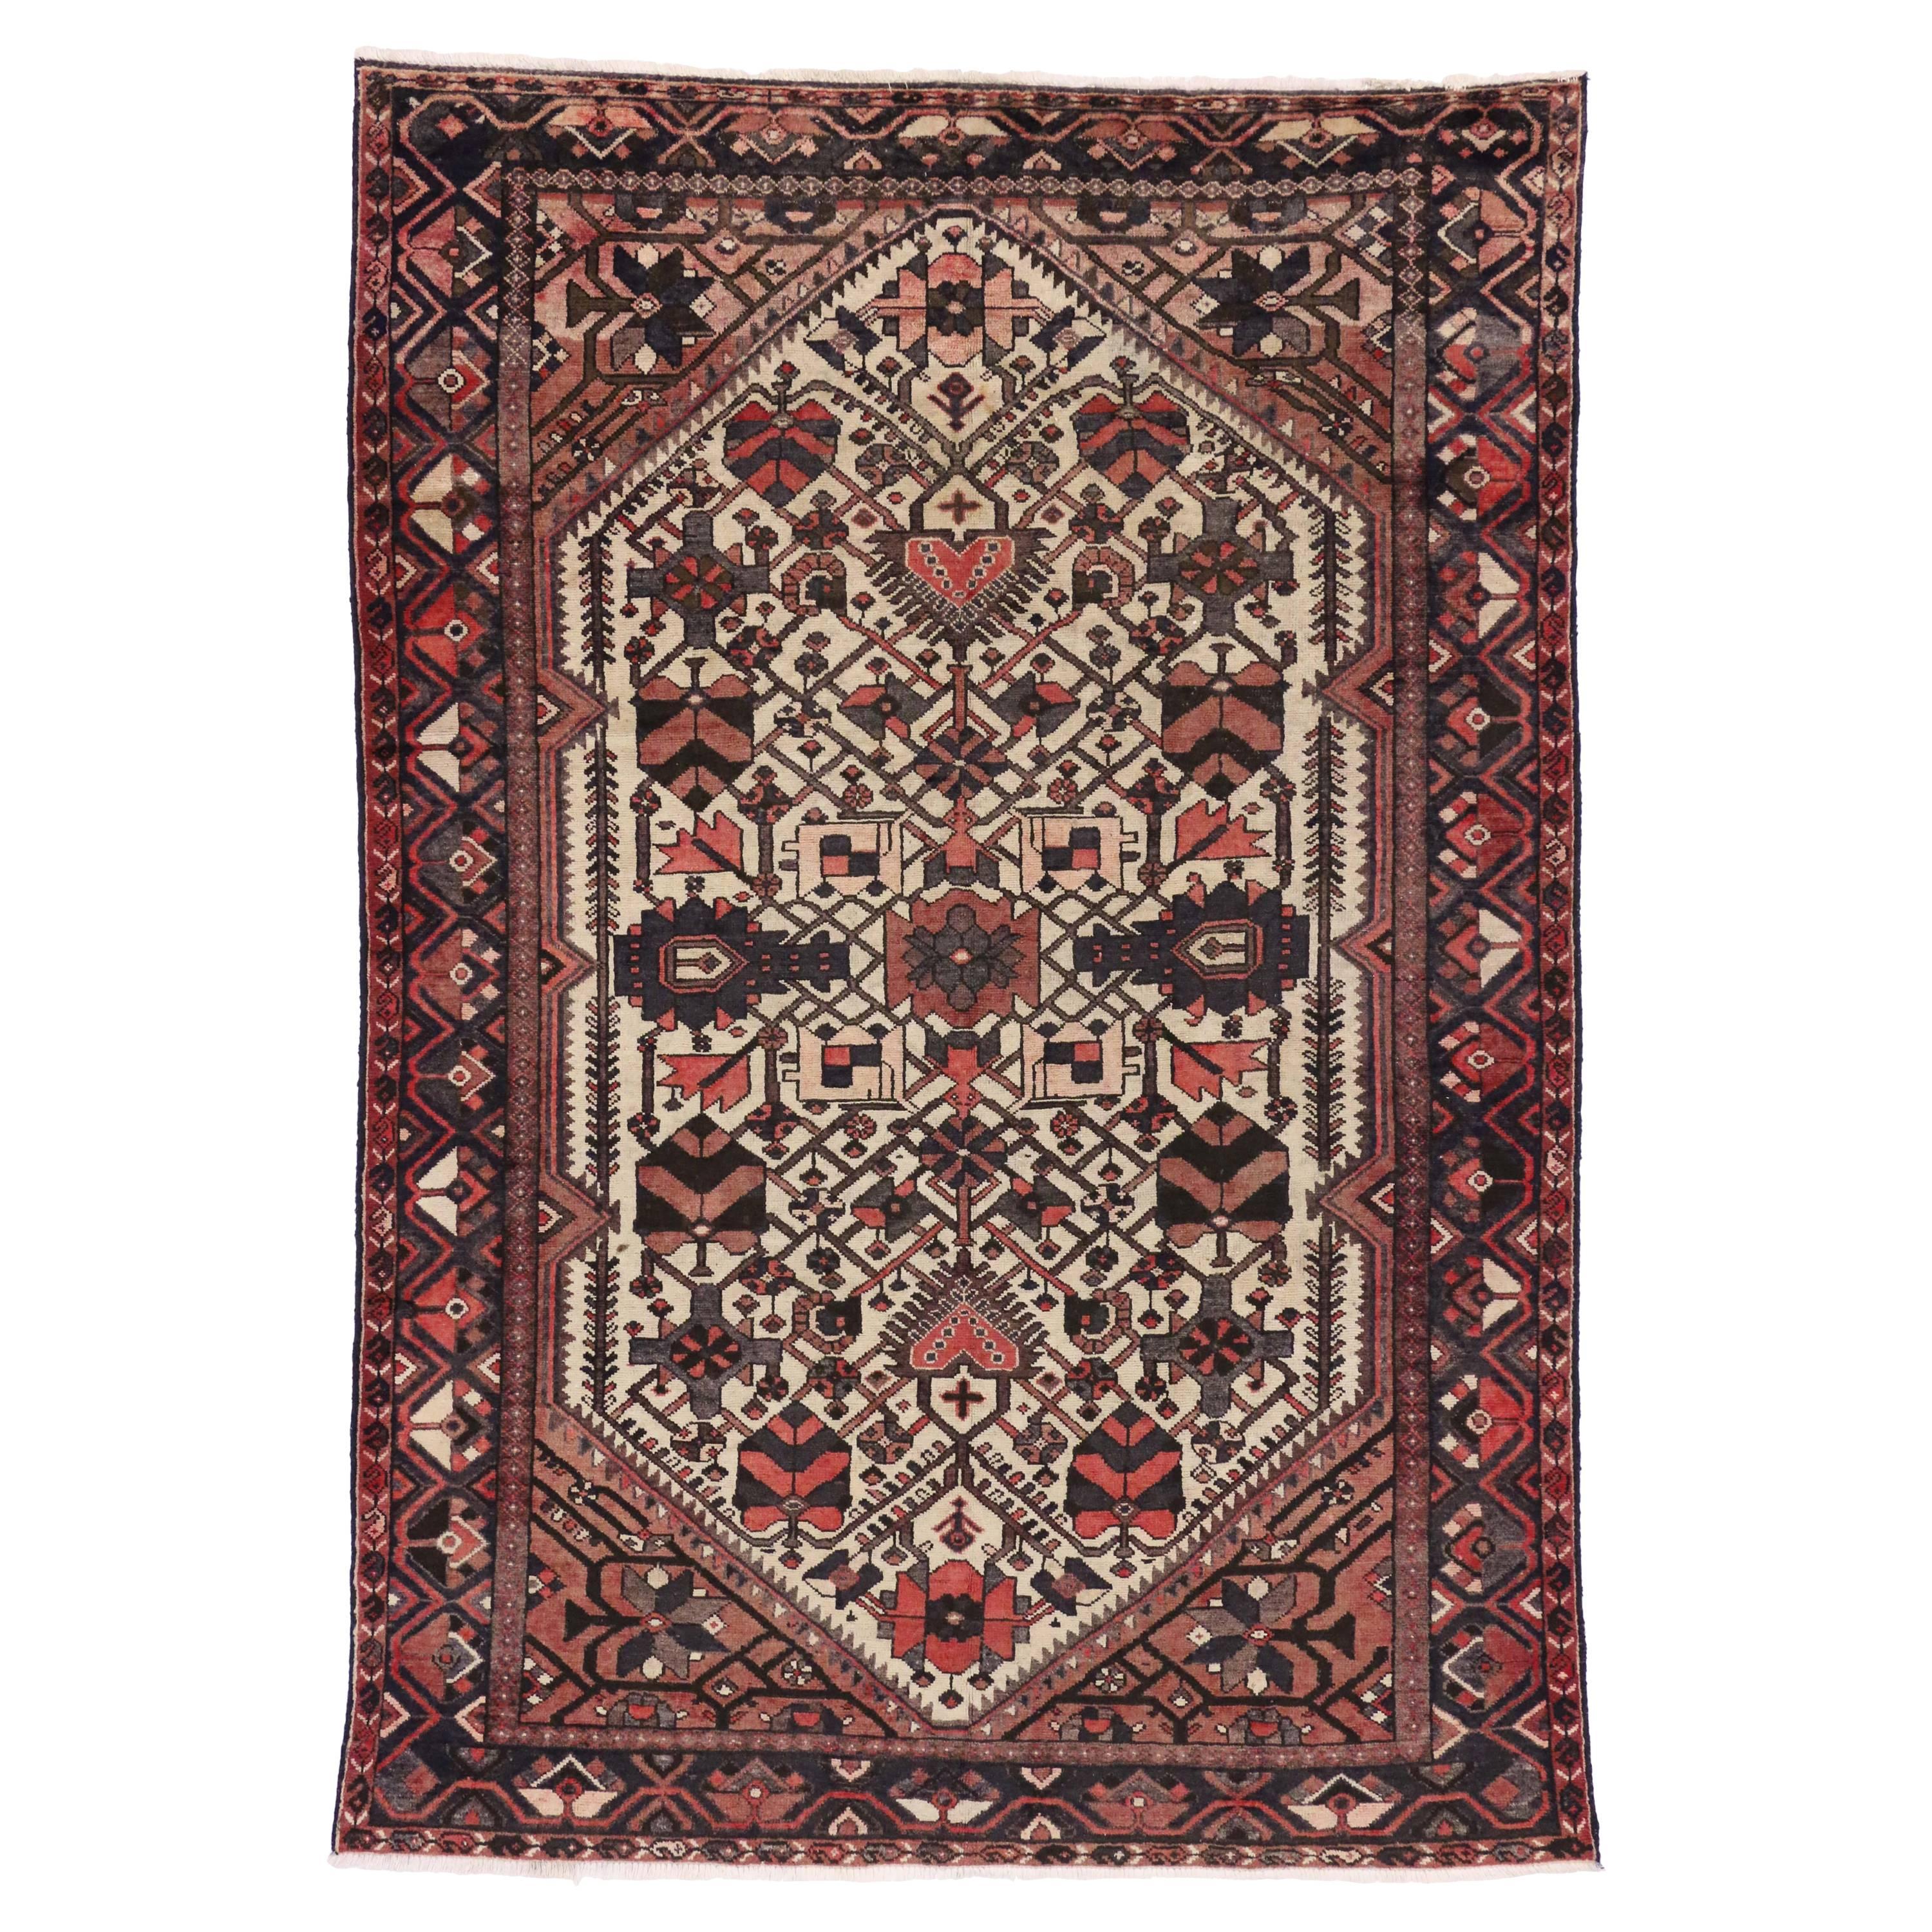 Antique Persian Bakhtiari Rug with Modern Style